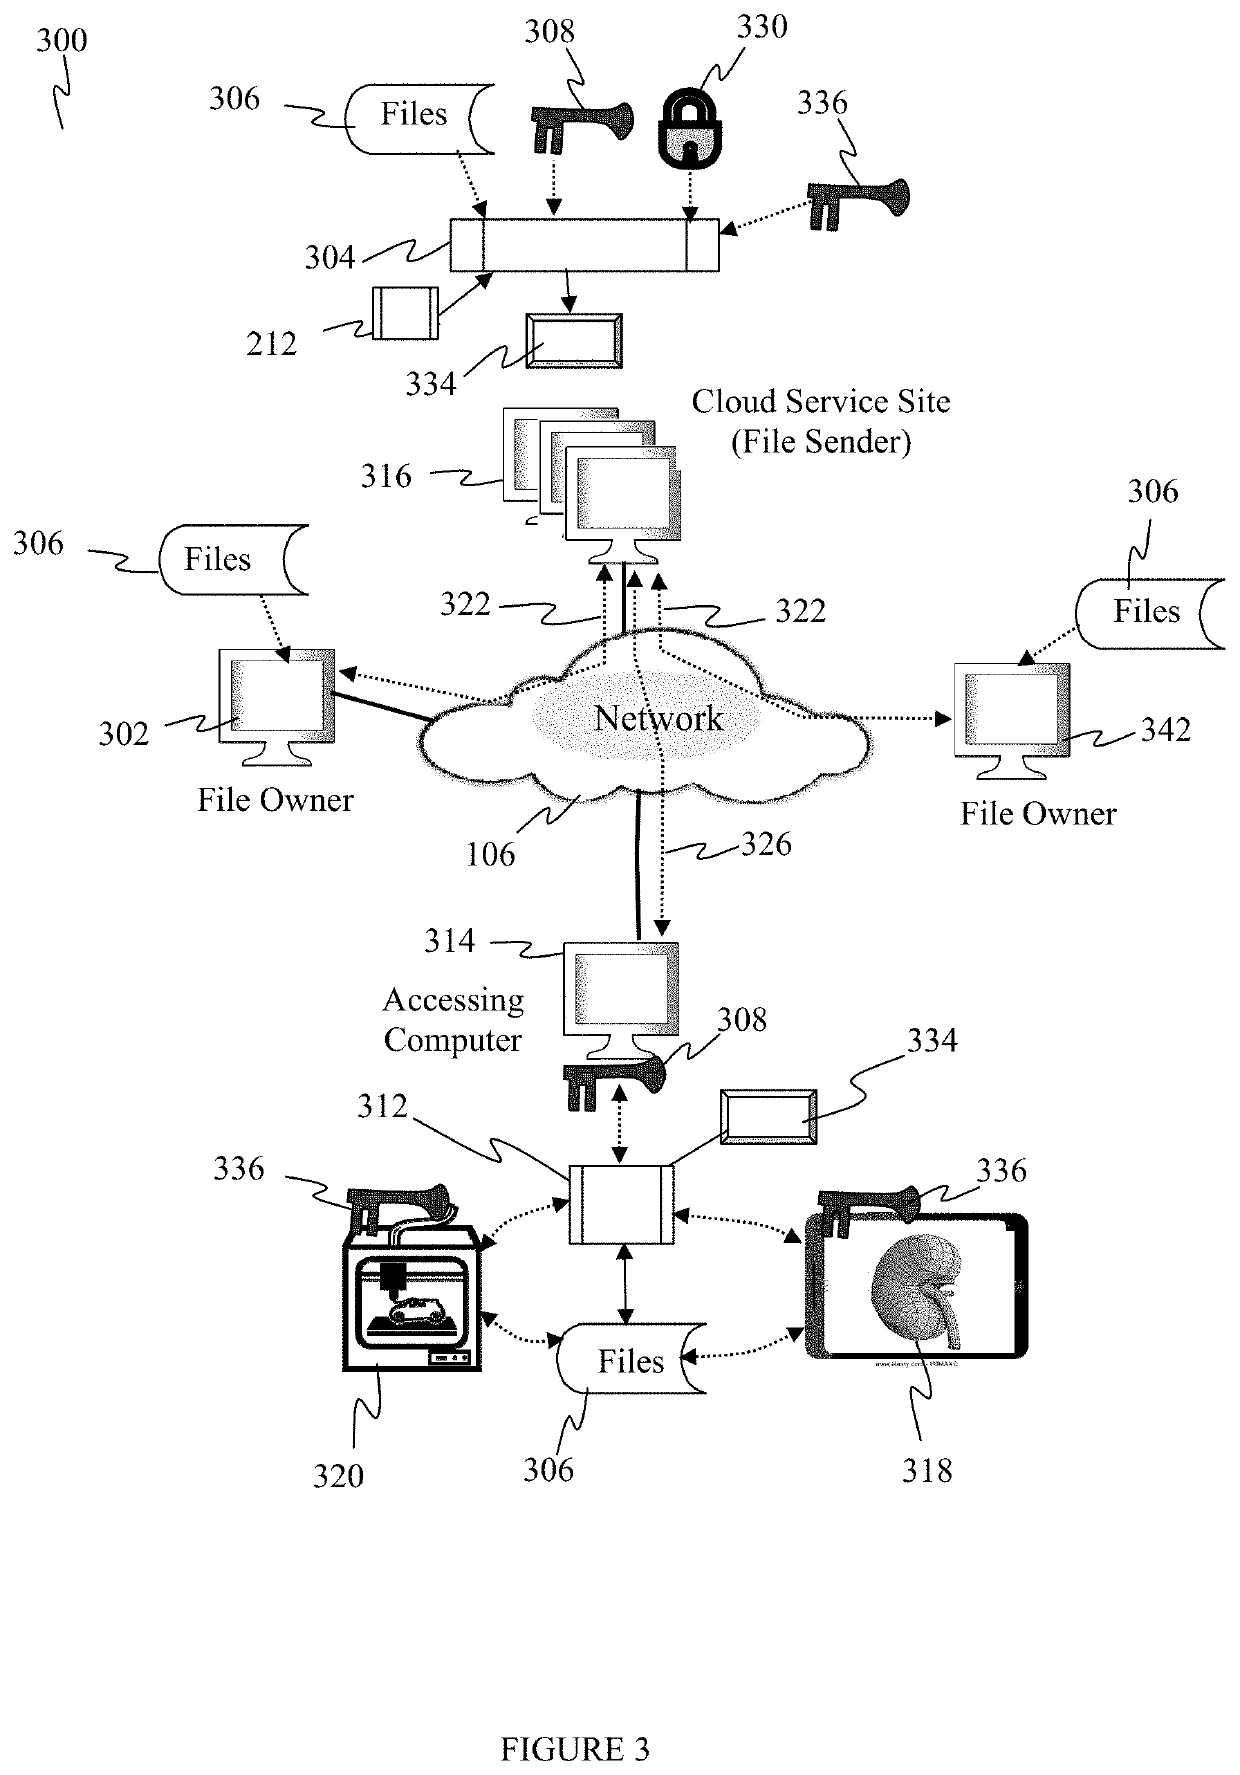 Systems, devices and methods for protecting and exchanging electronic computer files